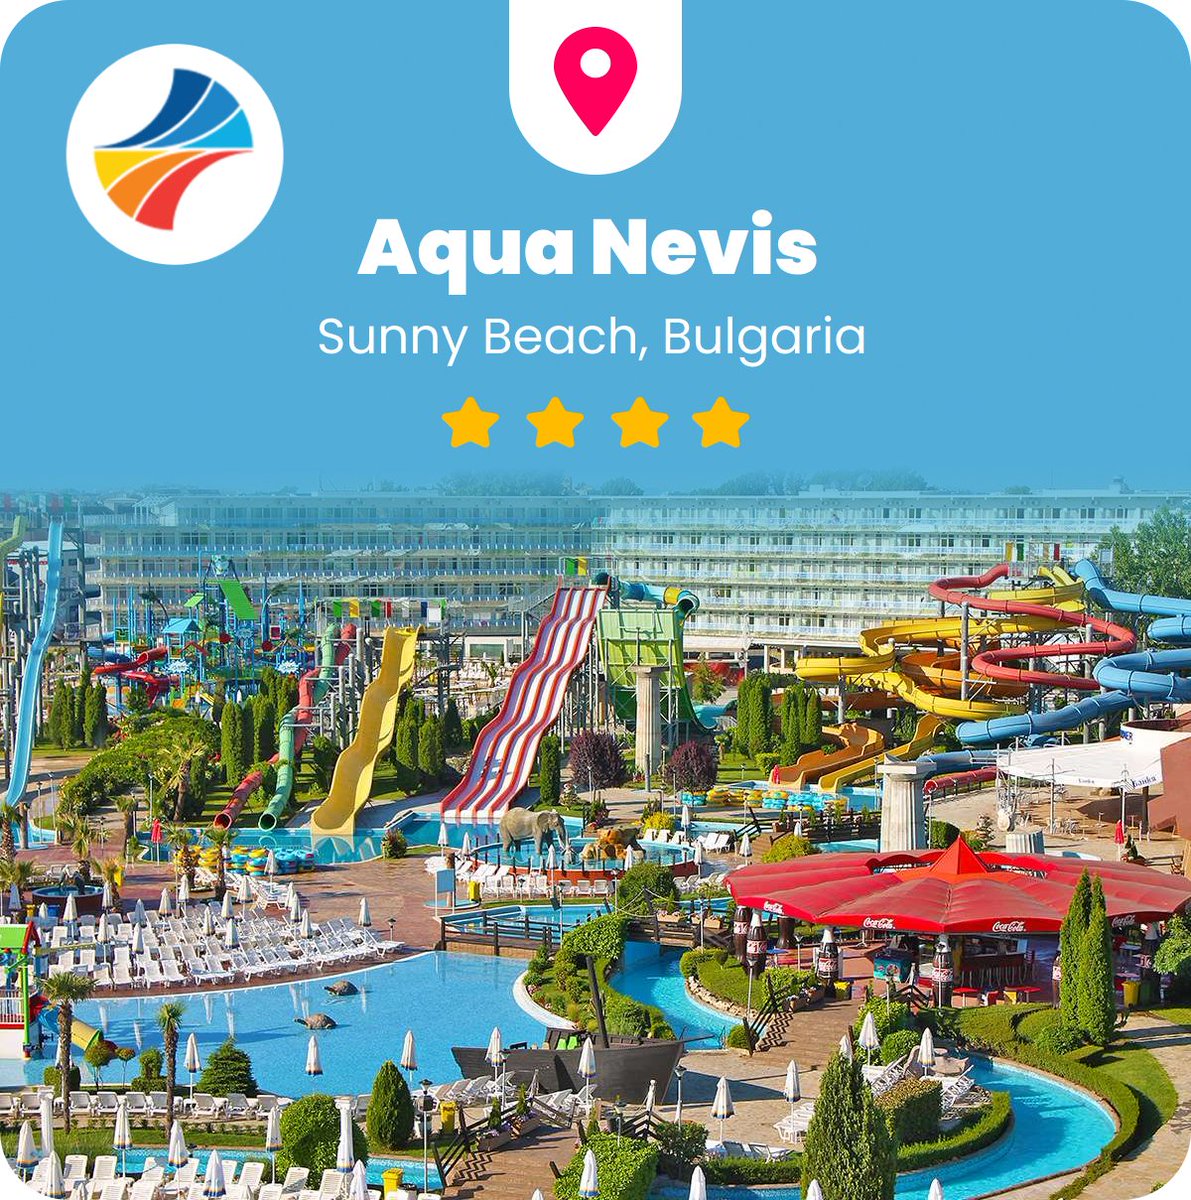 😍The 👑Aqua Nevis Club Hotel👑 is a wonderful ✨4 Star✨ all-inclusive hotel in☀️Sunny Beach☀️ that has its own aqua park, a 🥰HUGE🥰 Outdoor Swimming Pool and Beautifully Maintained Gardens. To💥 BOOK💥 Click Here 👉 bit.ly/48k0fvX